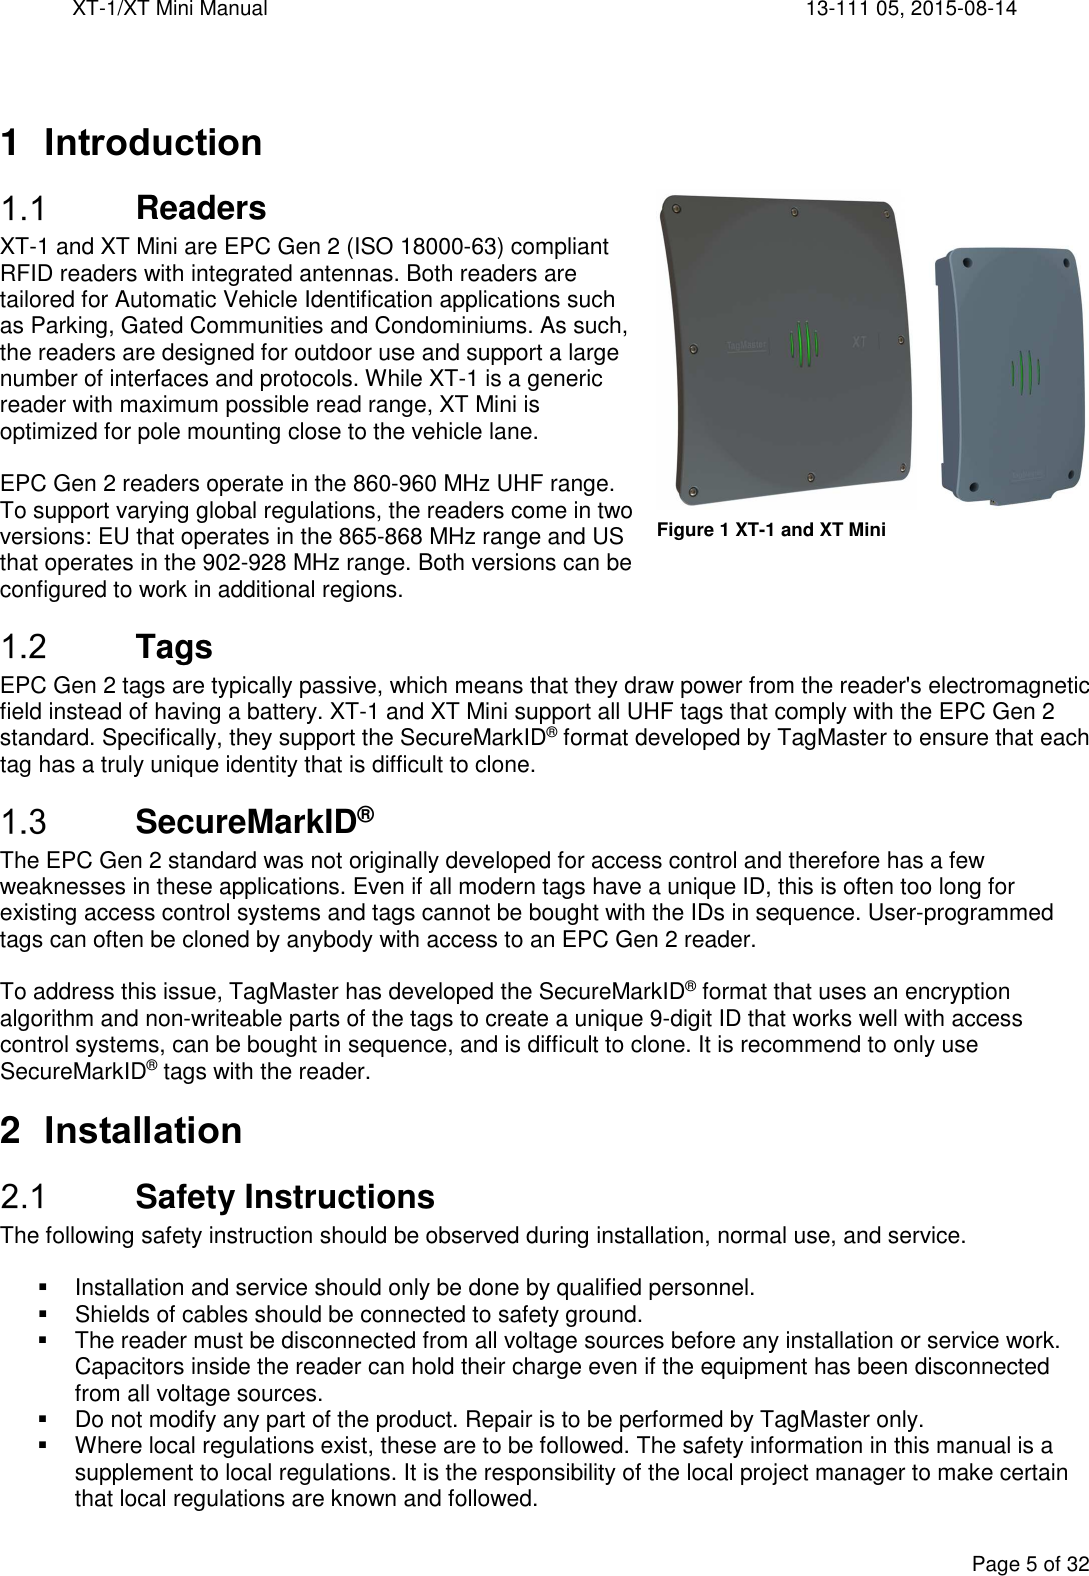 XT-1/XT Mini Manual     13-111 05, 2015-08-14  Page 5 of 32    1  Introduction  Readers XT-1 and XT Mini are EPC Gen 2 (ISO 18000-63) compliant RFID readers with integrated antennas. Both readers are tailored for Automatic Vehicle Identification applications such as Parking, Gated Communities and Condominiums. As such, the readers are designed for outdoor use and support a large number of interfaces and protocols. While XT-1 is a generic reader with maximum possible read range, XT Mini is optimized for pole mounting close to the vehicle lane.  EPC Gen 2 readers operate in the 860-960 MHz UHF range. To support varying global regulations, the readers come in two versions: EU that operates in the 865-868 MHz range and US that operates in the 902-928 MHz range. Both versions can be configured to work in additional regions.  Tags EPC Gen 2 tags are typically passive, which means that they draw power from the reader&apos;s electromagnetic field instead of having a battery. XT-1 and XT Mini support all UHF tags that comply with the EPC Gen 2 standard. Specifically, they support the SecureMarkID® format developed by TagMaster to ensure that each tag has a truly unique identity that is difficult to clone.  SecureMarkID® The EPC Gen 2 standard was not originally developed for access control and therefore has a few weaknesses in these applications. Even if all modern tags have a unique ID, this is often too long for existing access control systems and tags cannot be bought with the IDs in sequence. User-programmed tags can often be cloned by anybody with access to an EPC Gen 2 reader.   To address this issue, TagMaster has developed the SecureMarkID® format that uses an encryption algorithm and non-writeable parts of the tags to create a unique 9-digit ID that works well with access control systems, can be bought in sequence, and is difficult to clone. It is recommend to only use SecureMarkID® tags with the reader. 2  Installation  Safety Instructions The following safety instruction should be observed during installation, normal use, and service.    Installation and service should only be done by qualified personnel.   Shields of cables should be connected to safety ground.   The reader must be disconnected from all voltage sources before any installation or service work. Capacitors inside the reader can hold their charge even if the equipment has been disconnected from all voltage sources.   Do not modify any part of the product. Repair is to be performed by TagMaster only.   Where local regulations exist, these are to be followed. The safety information in this manual is a supplement to local regulations. It is the responsibility of the local project manager to make certain that local regulations are known and followed. Figure 1 XT-1 and XT Mini 